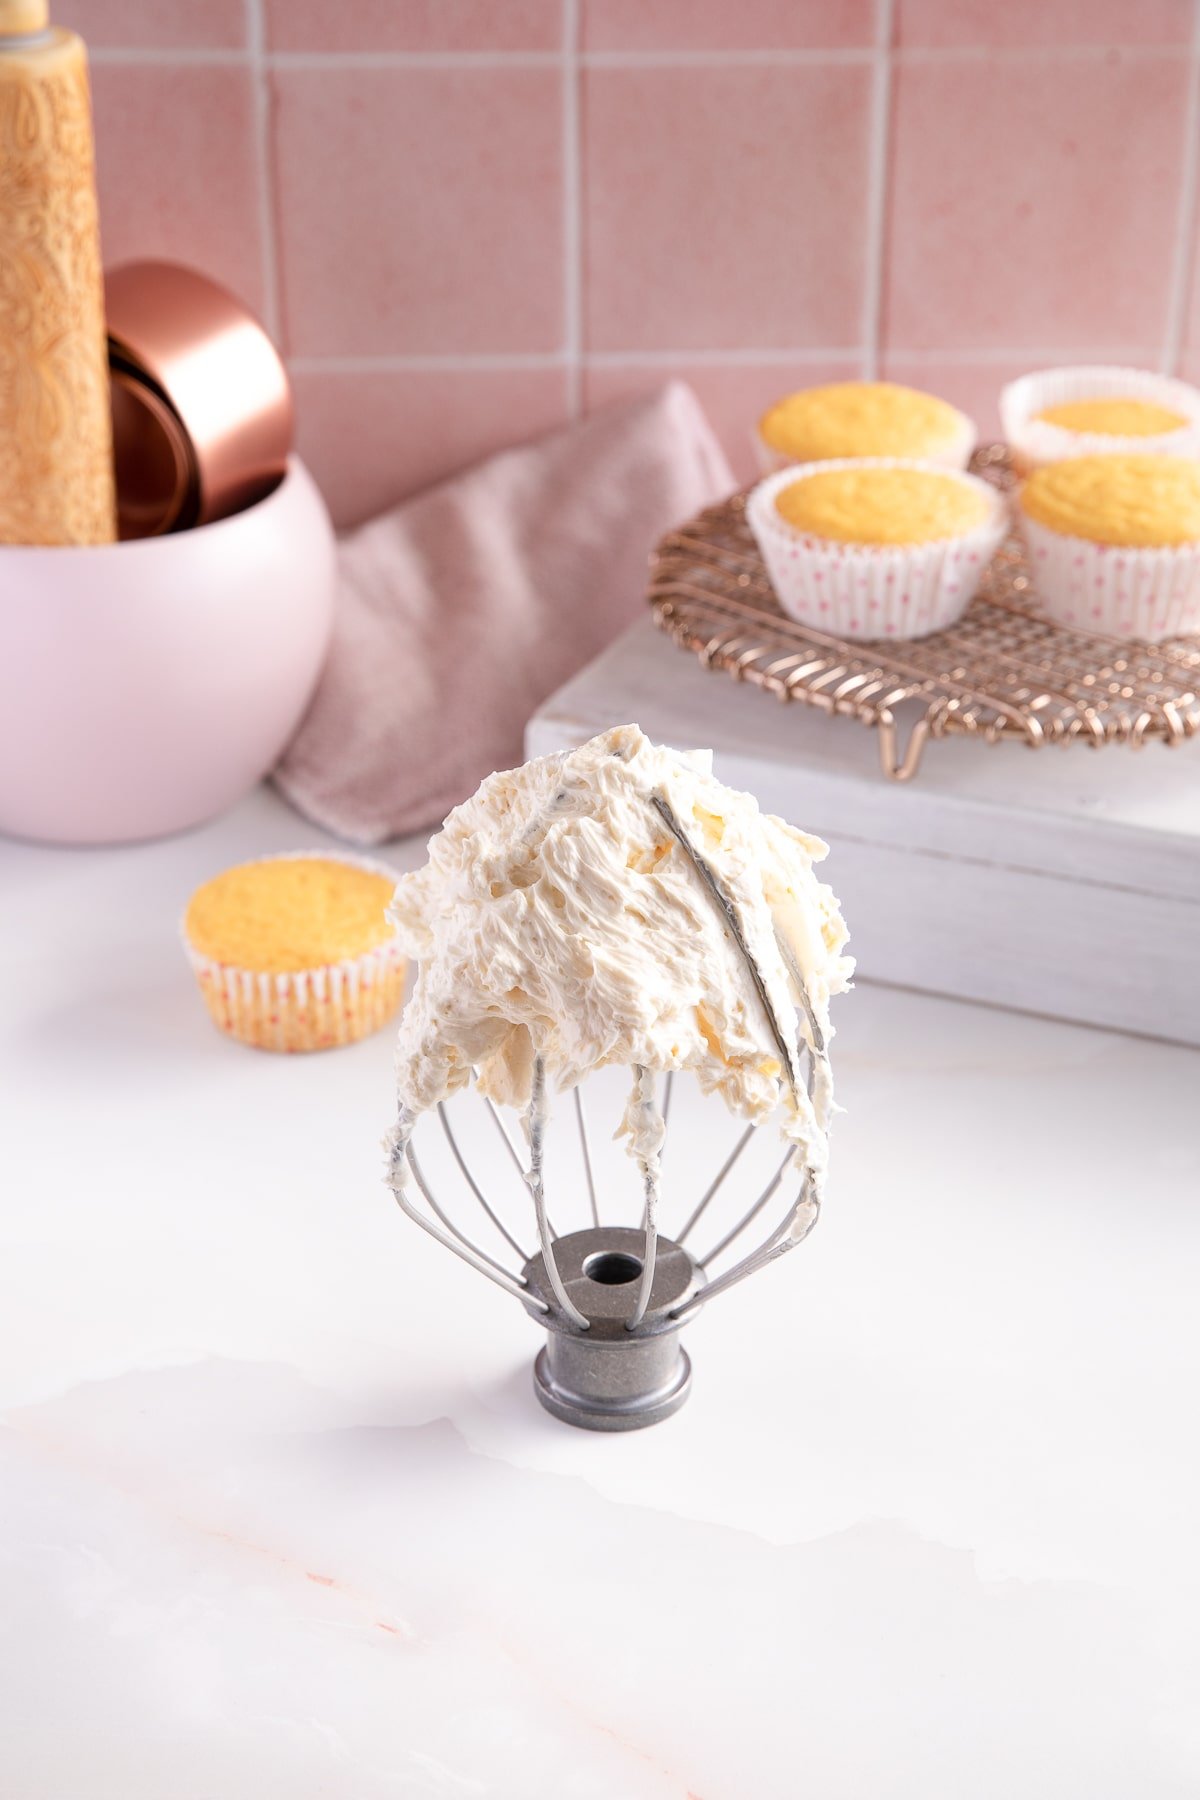 Sweetened Condensed Milk Frosting on whisk